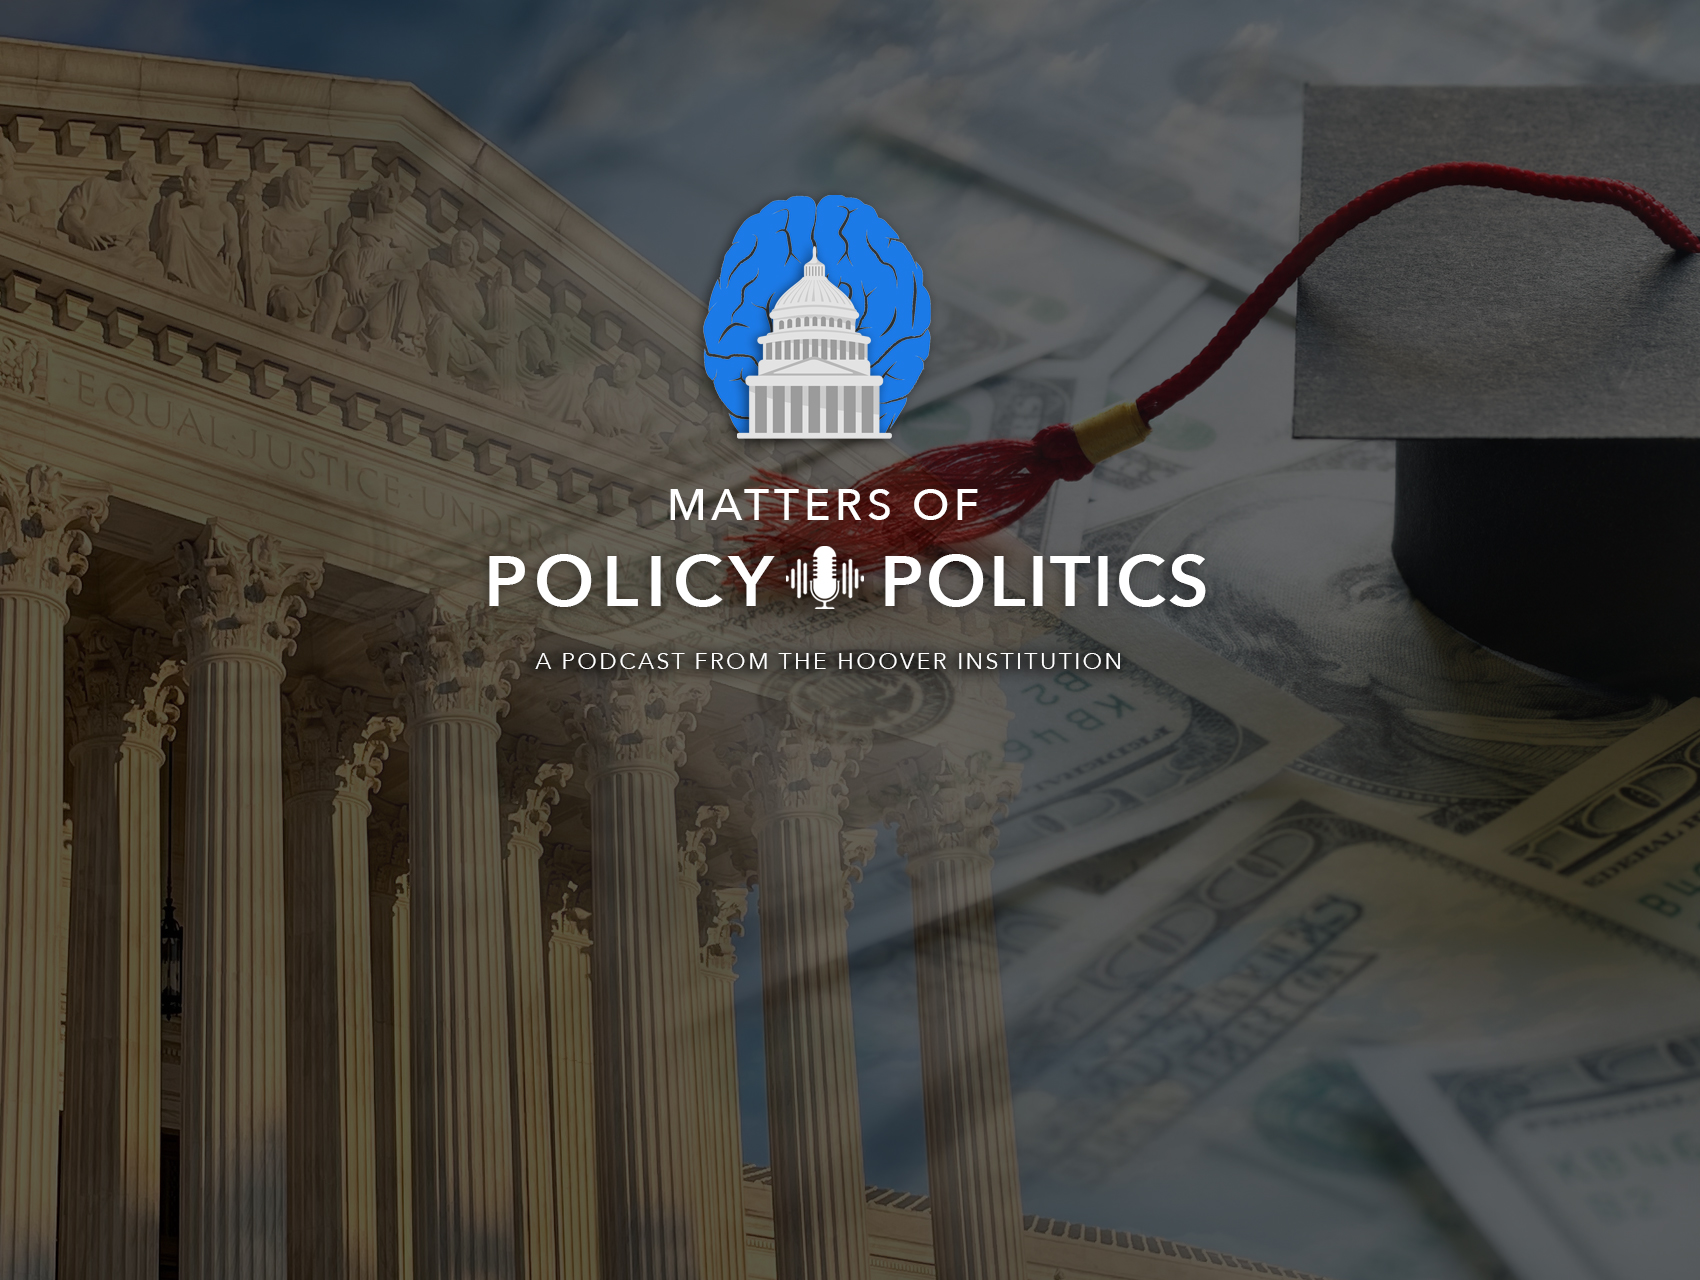 Matters of Policy & Politics: The Supreme Court: Student Loan Debt and “Hiding Elephants in Mouseholes”